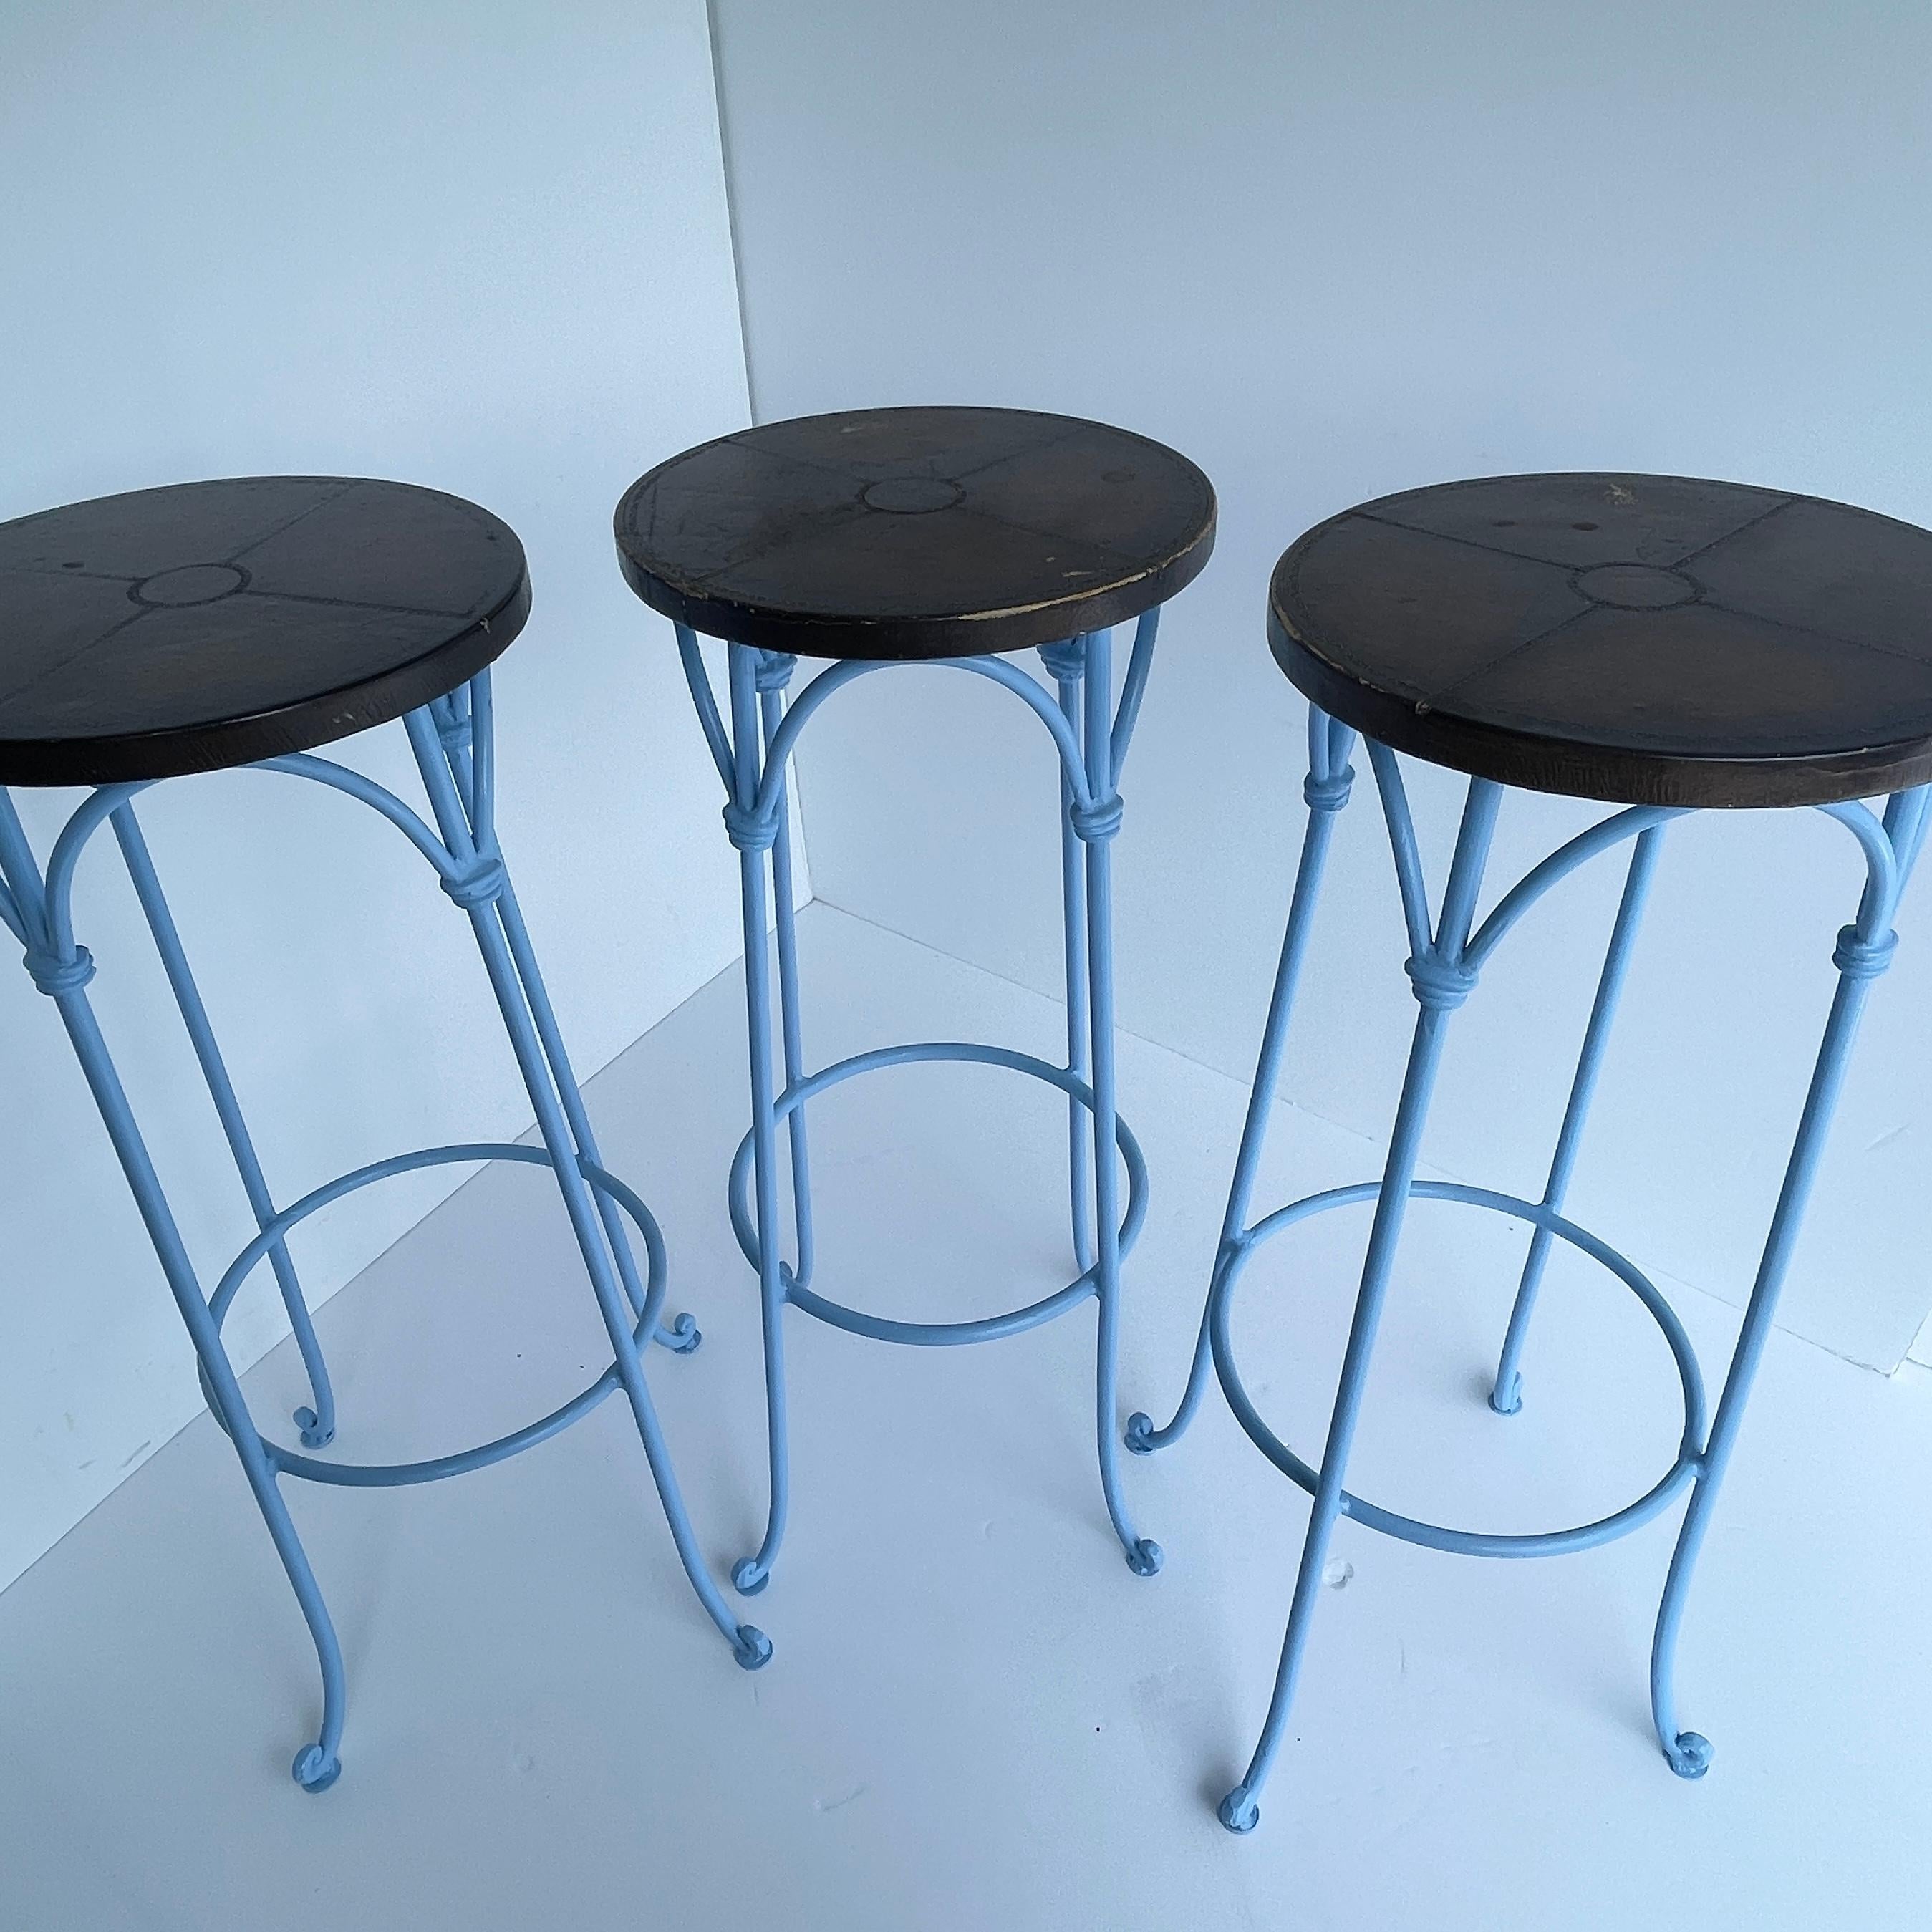 Three Blue Barstools with Leather Seats, Legs Powder Coated For Sale 5